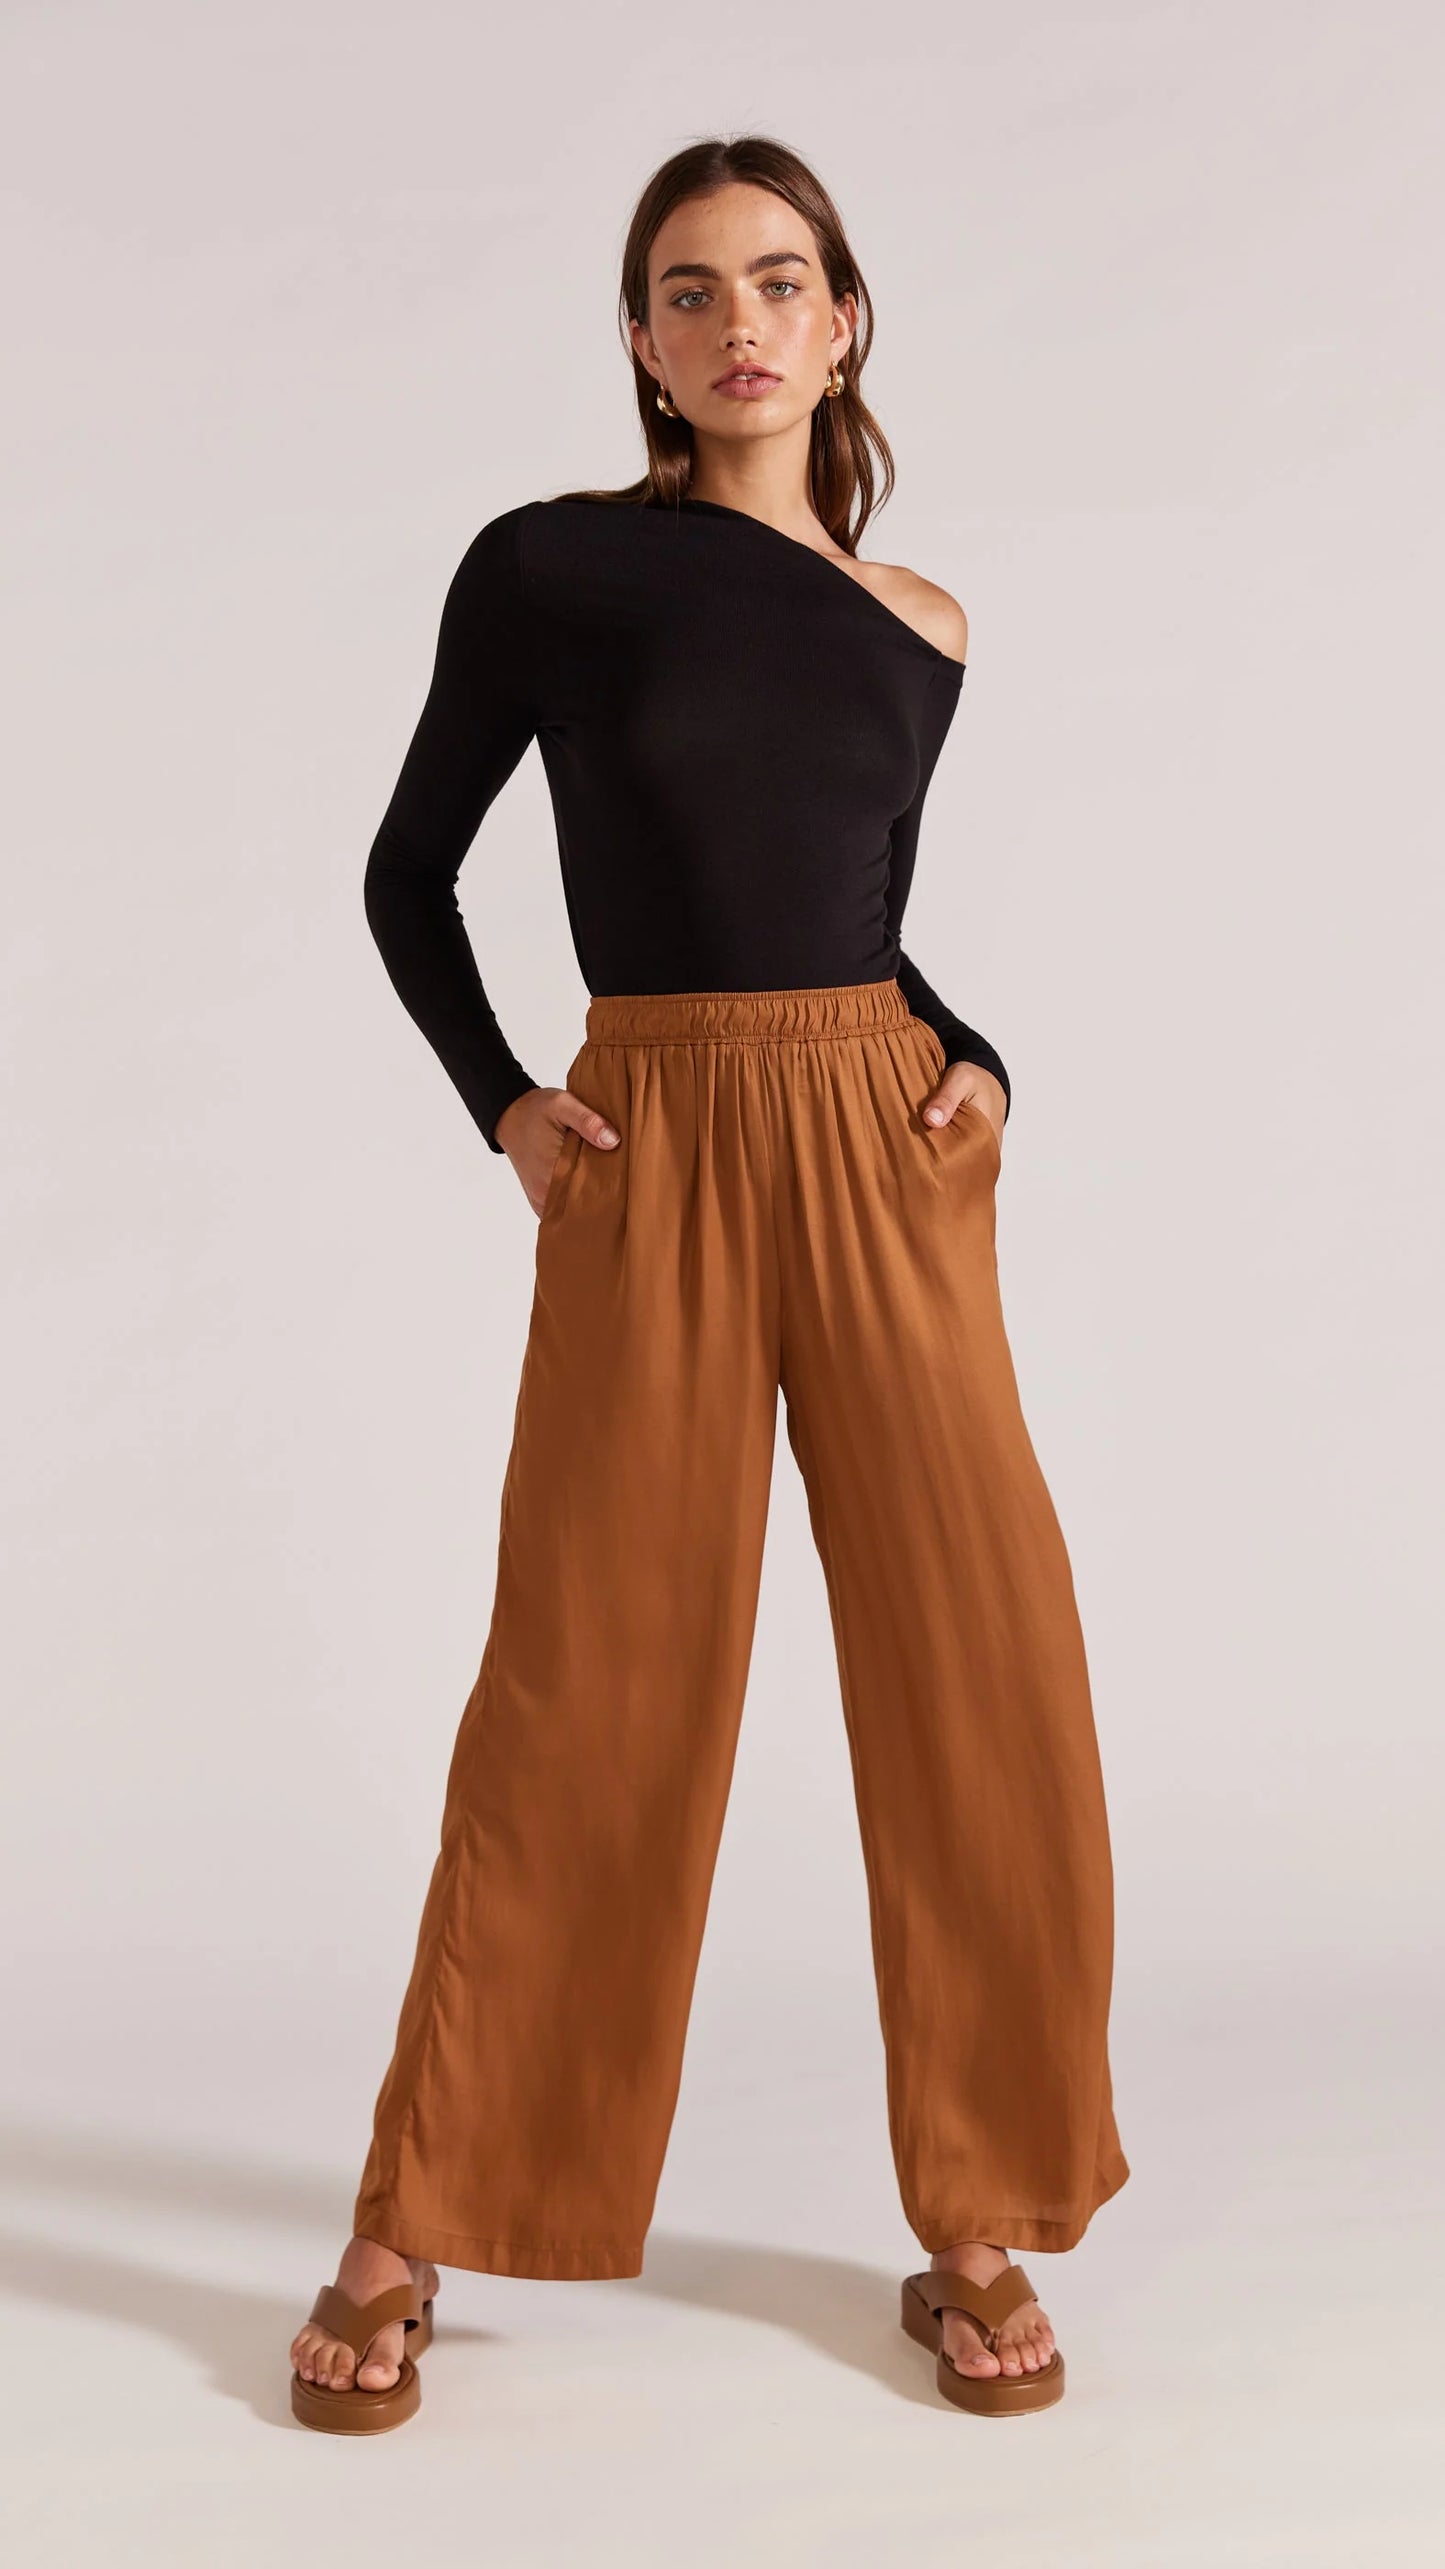 STAPLE THE LABEL Roison Pant - Toffee